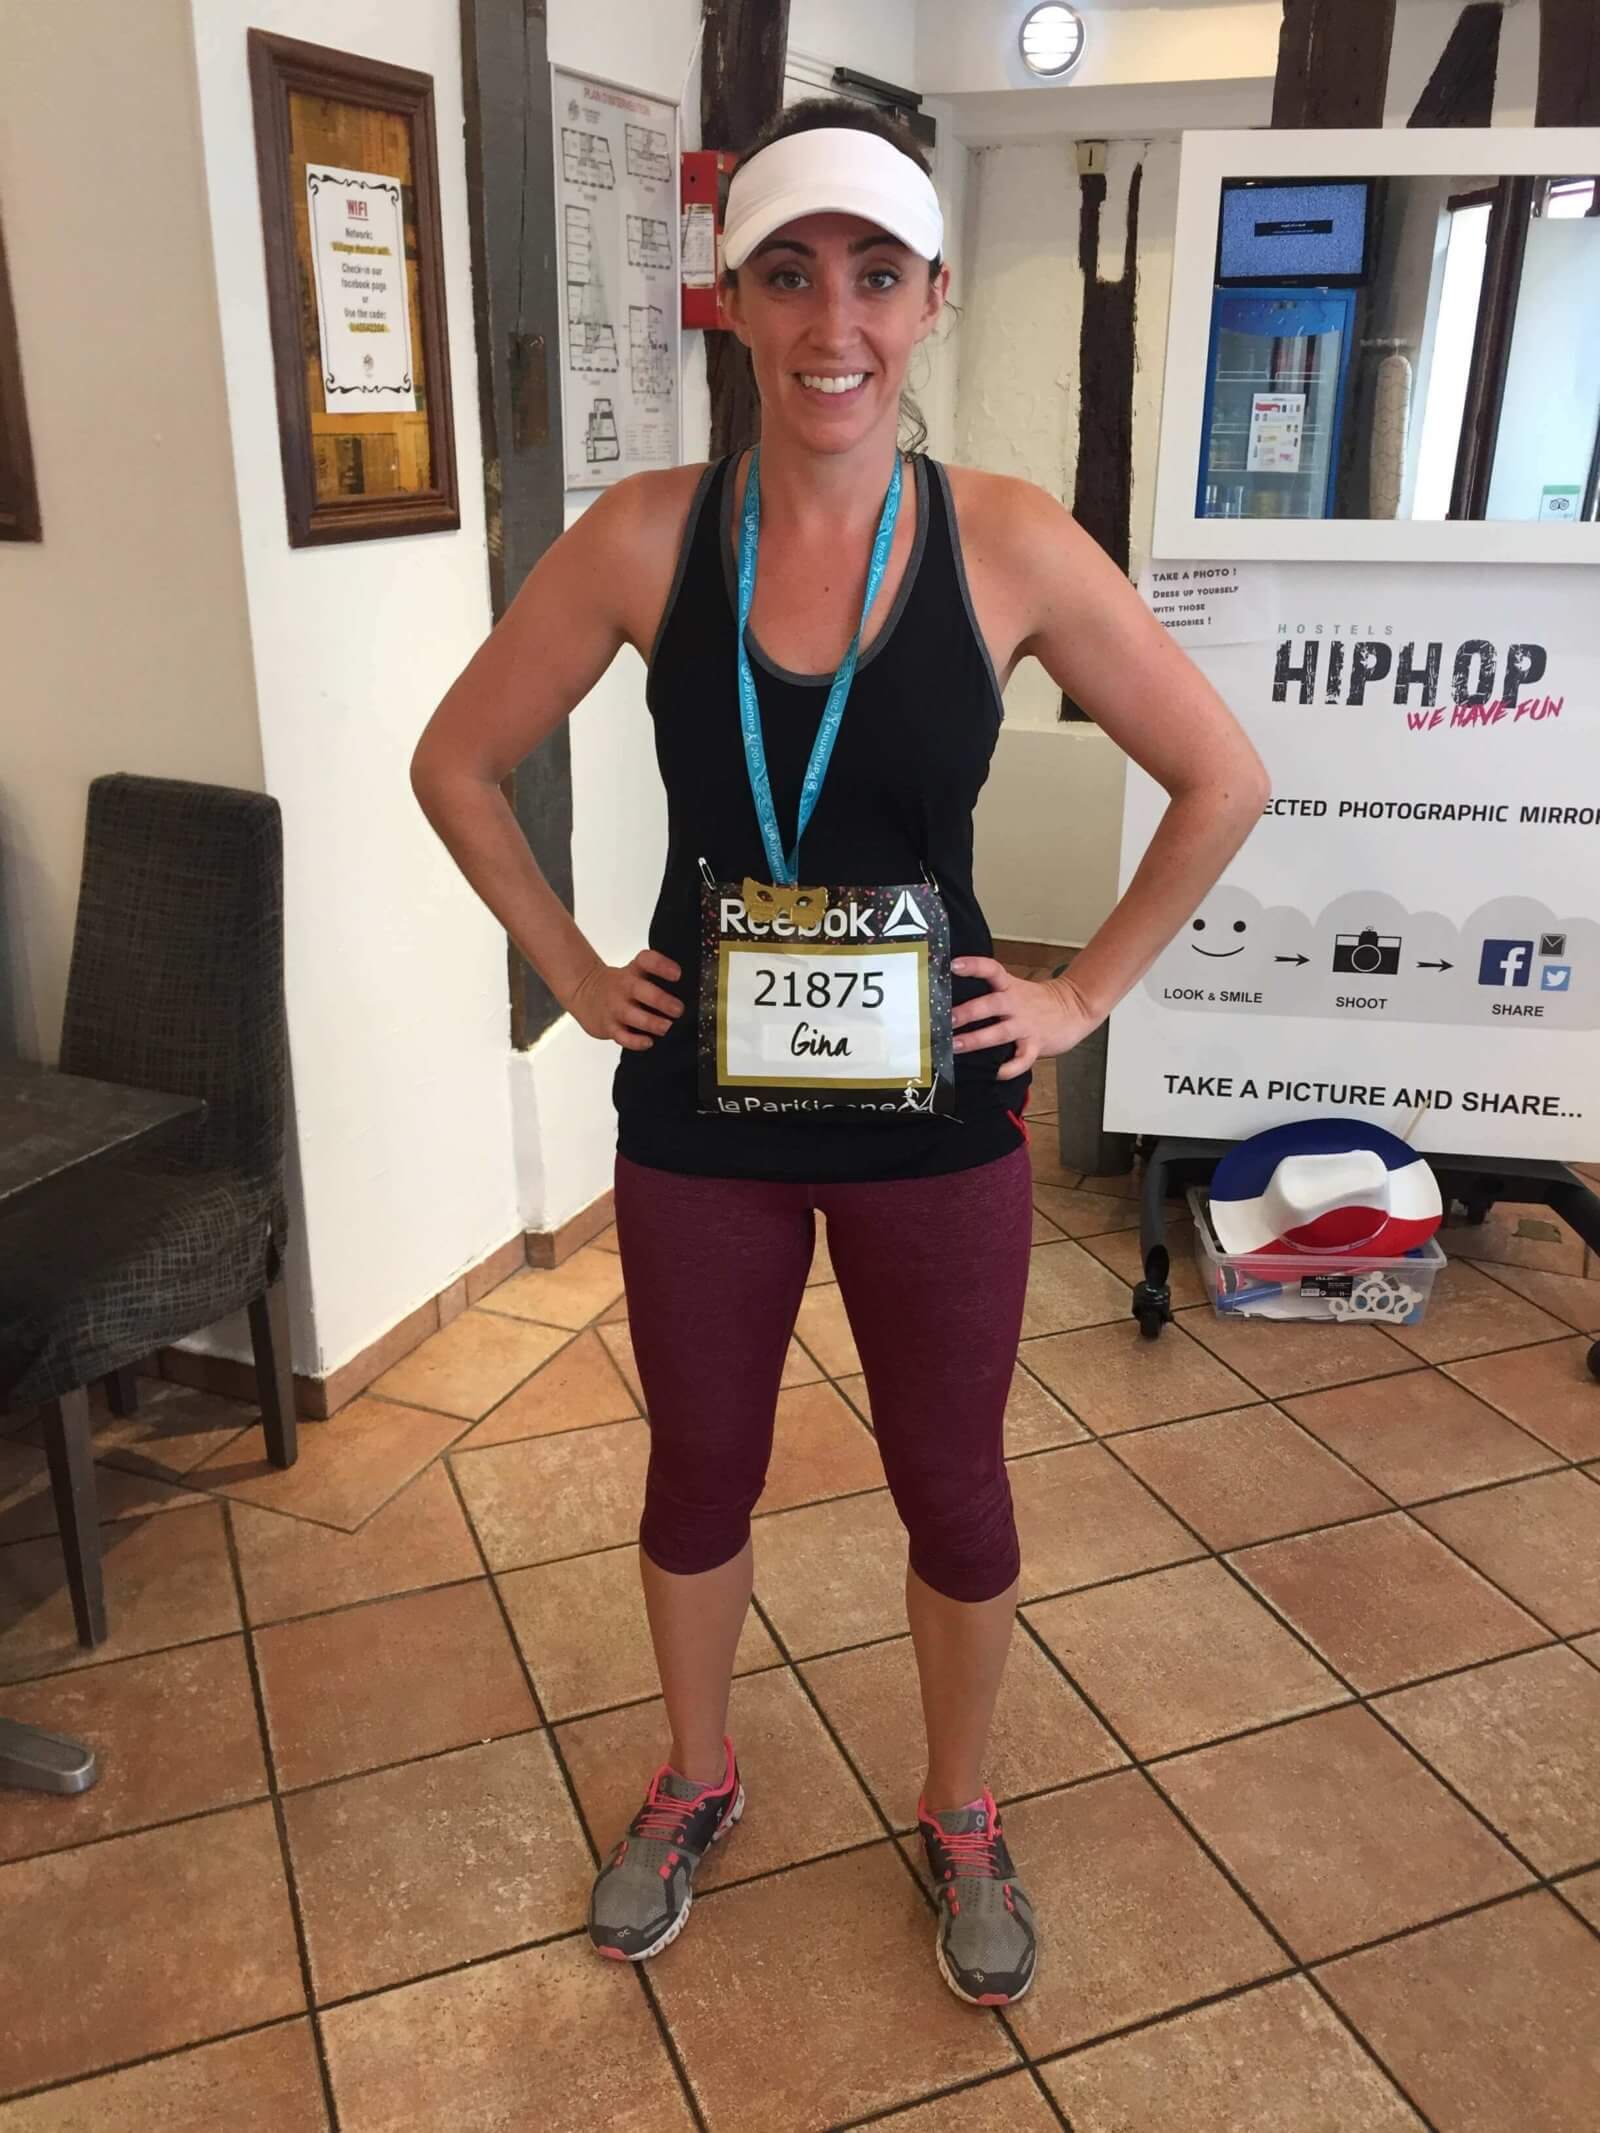 Woman after a road race wearing a medal to stay fit while traveling and running a race